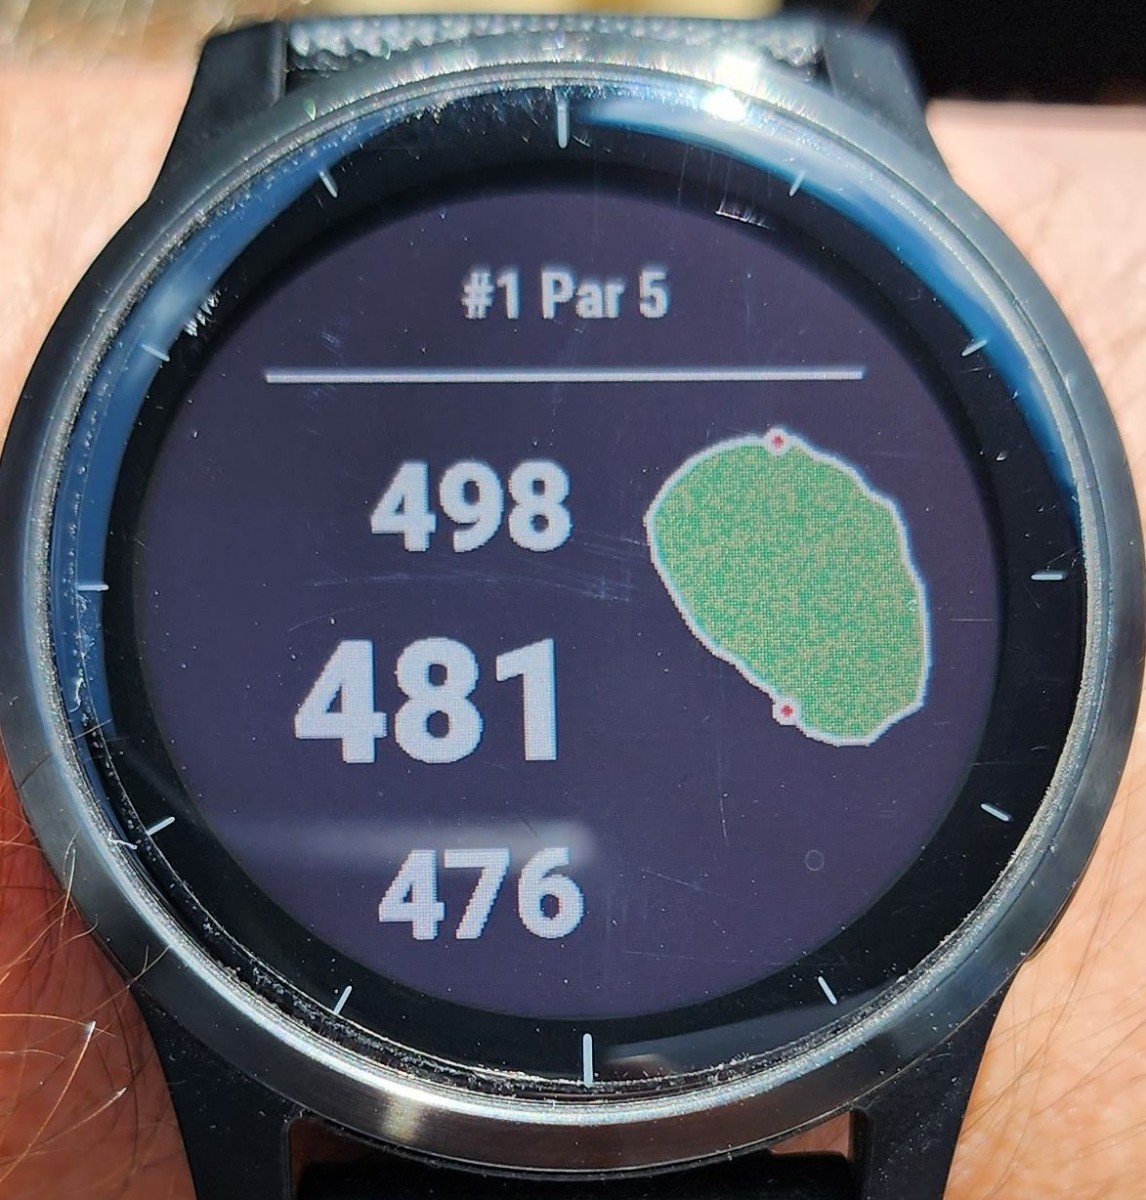 Garmin Vivoactive 4s review: So many fitness features, so little